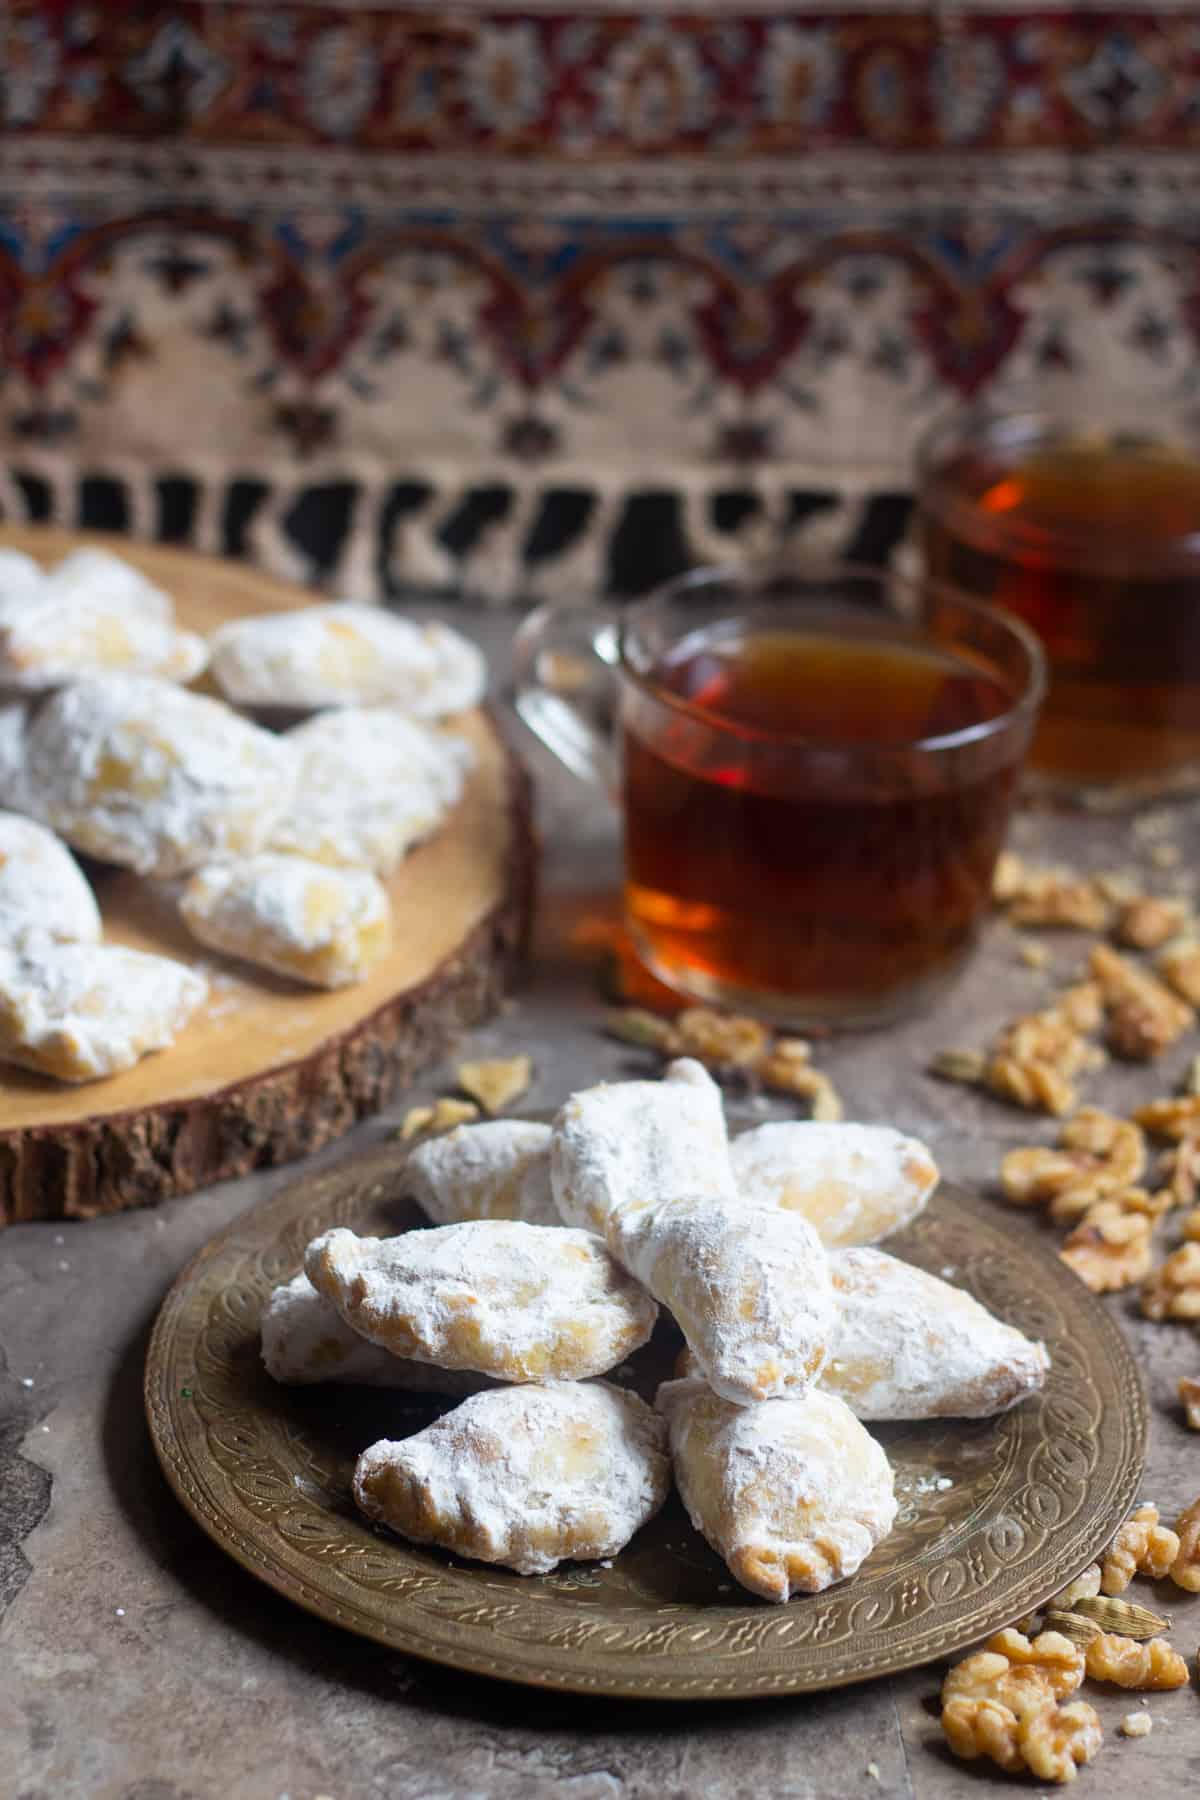 Qottab is a Persian pastry filled with walnuts is a delicious traditional treat from Iran. Delicate and flaky dough is filled with a combination of walnuts and cardamom - making this the perfect Persian dessert!